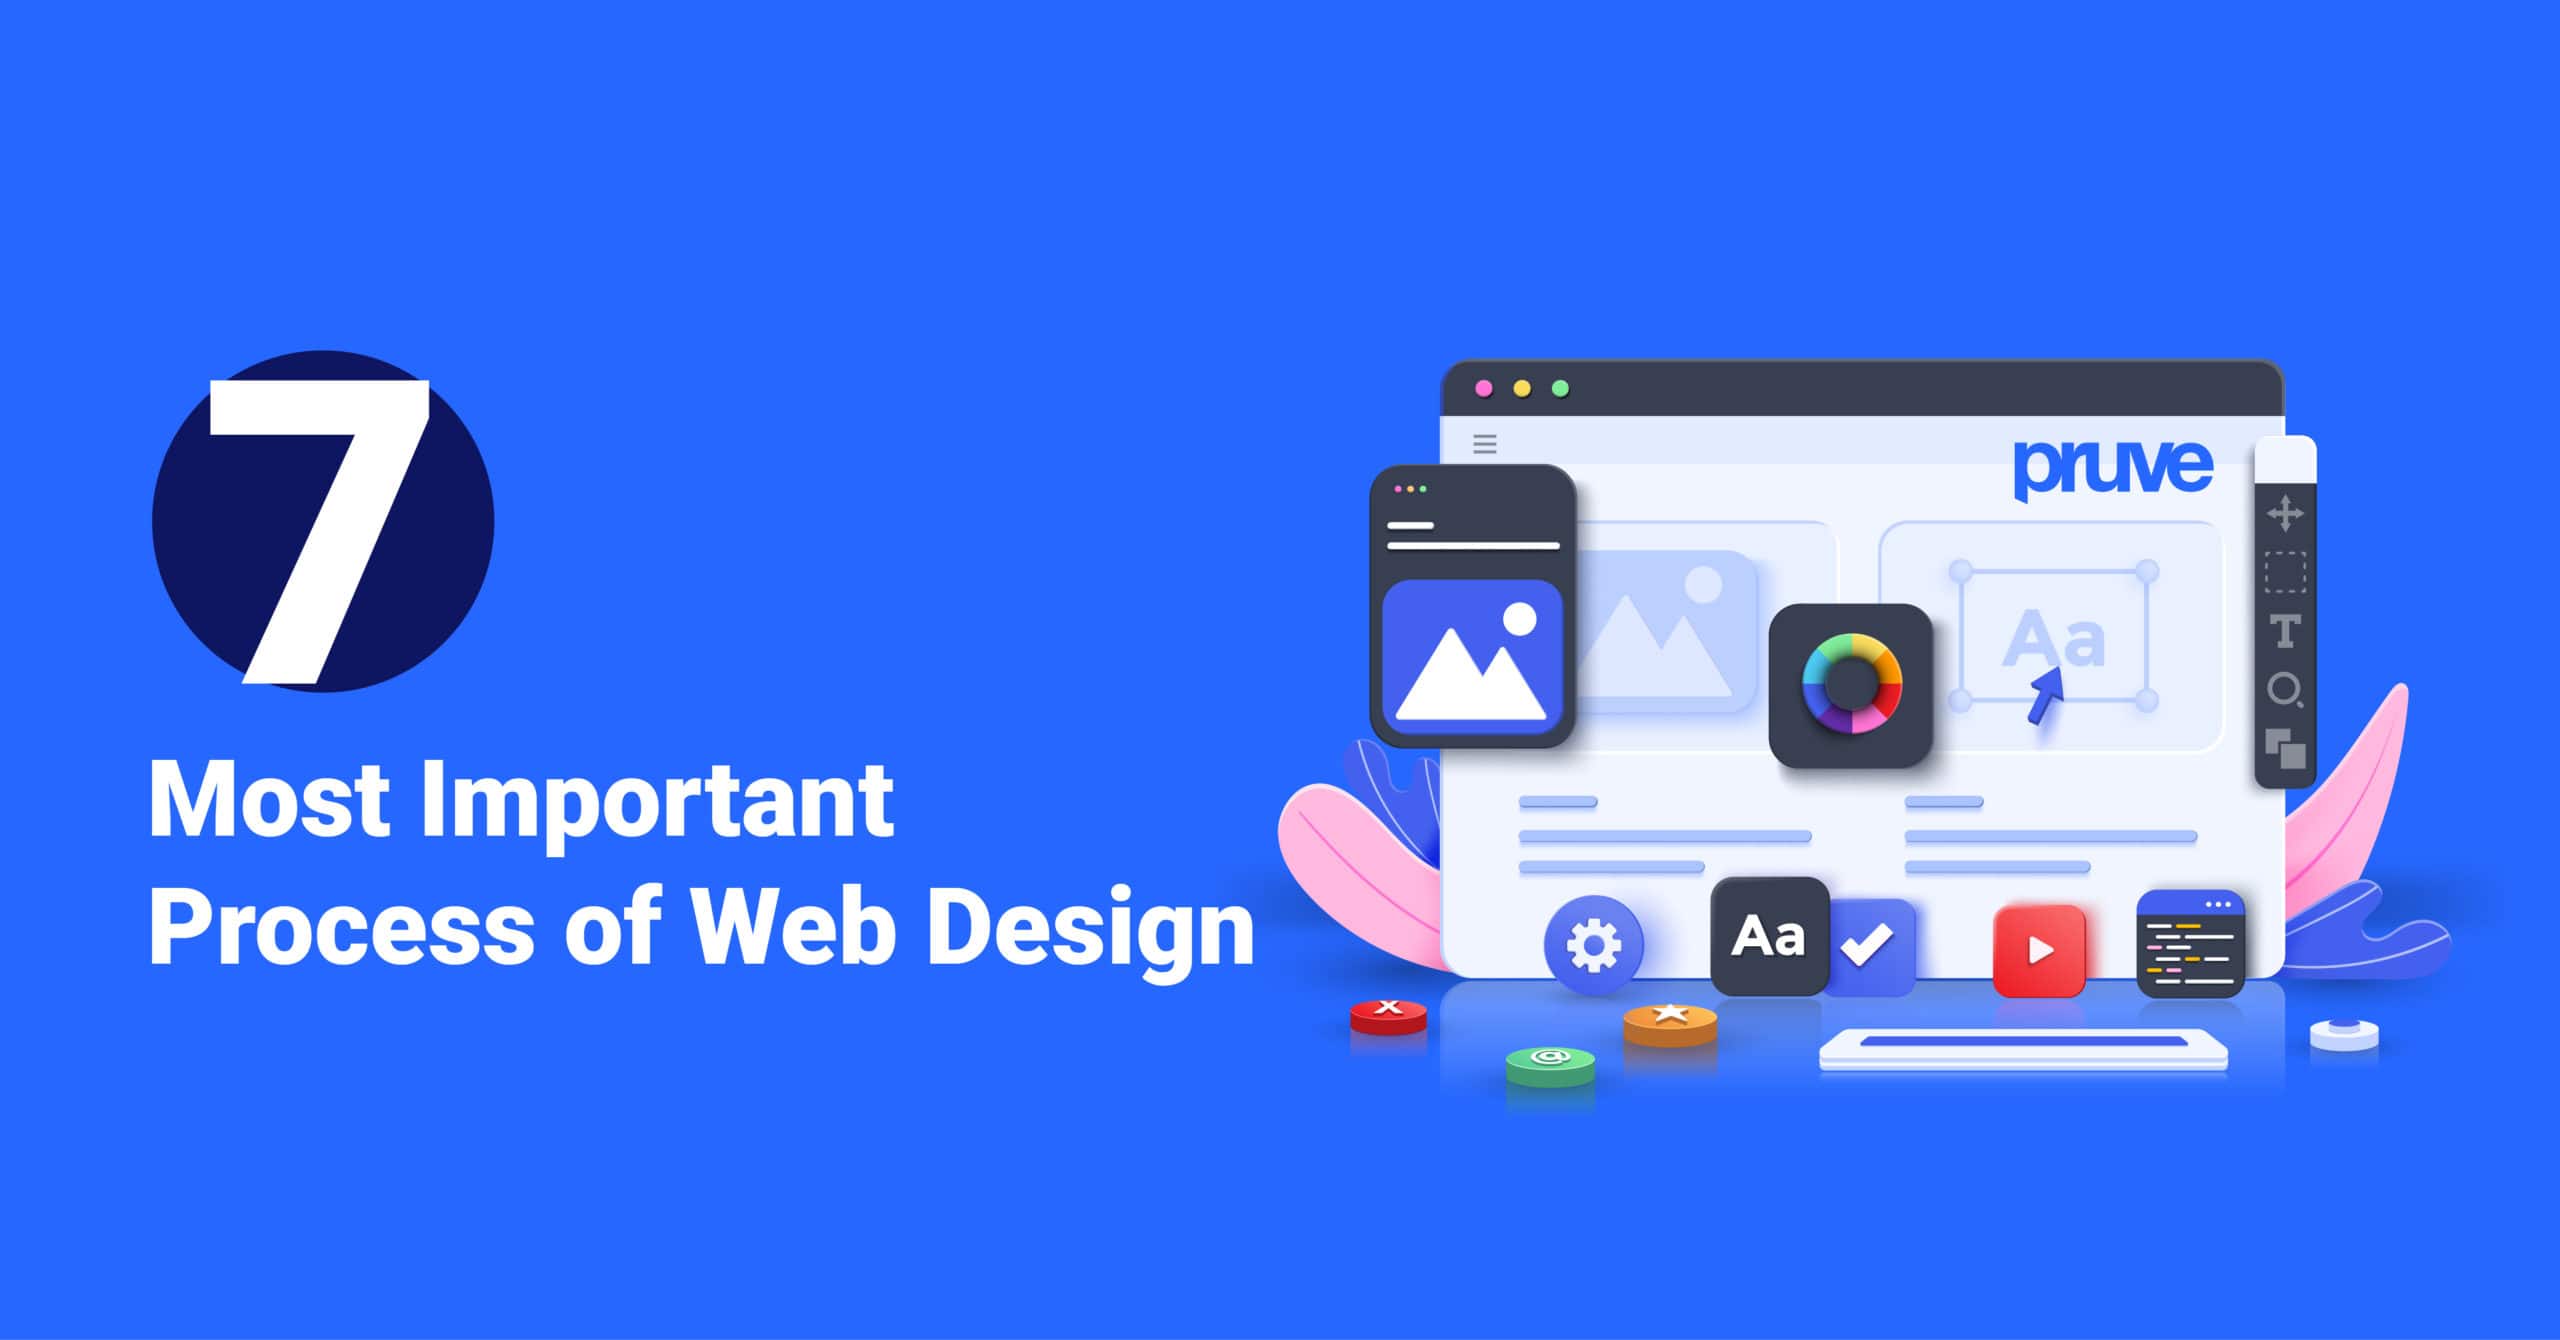 7 Most Important Process of Web Design